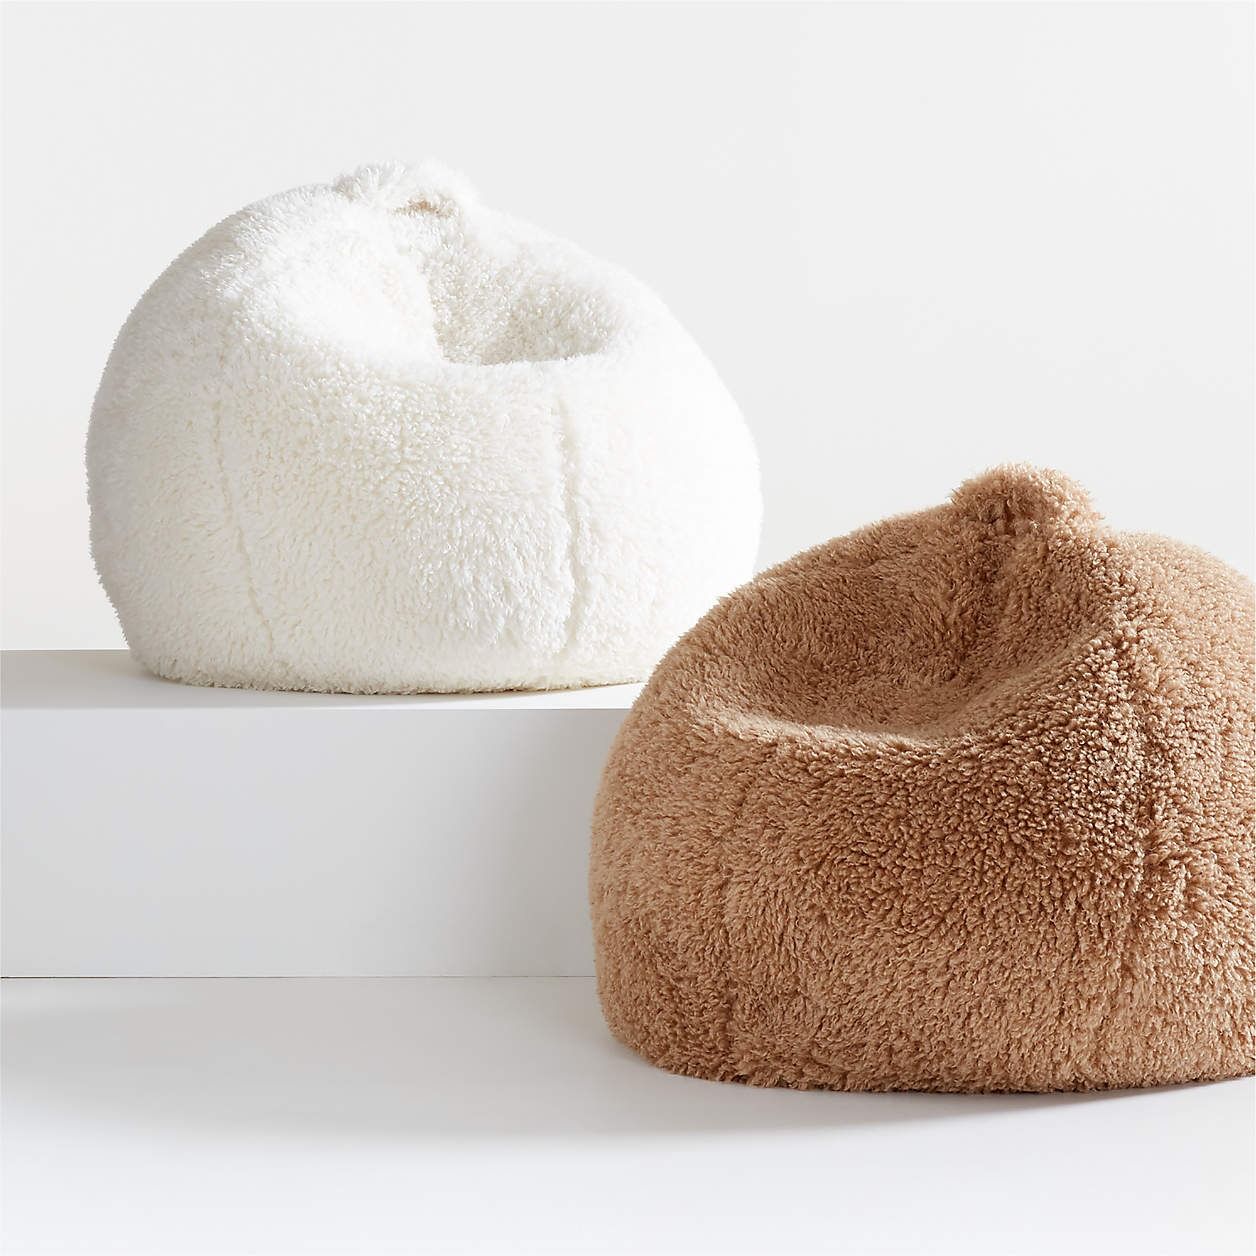 The Cozy Comfort of Kids Bean Bag Chairs